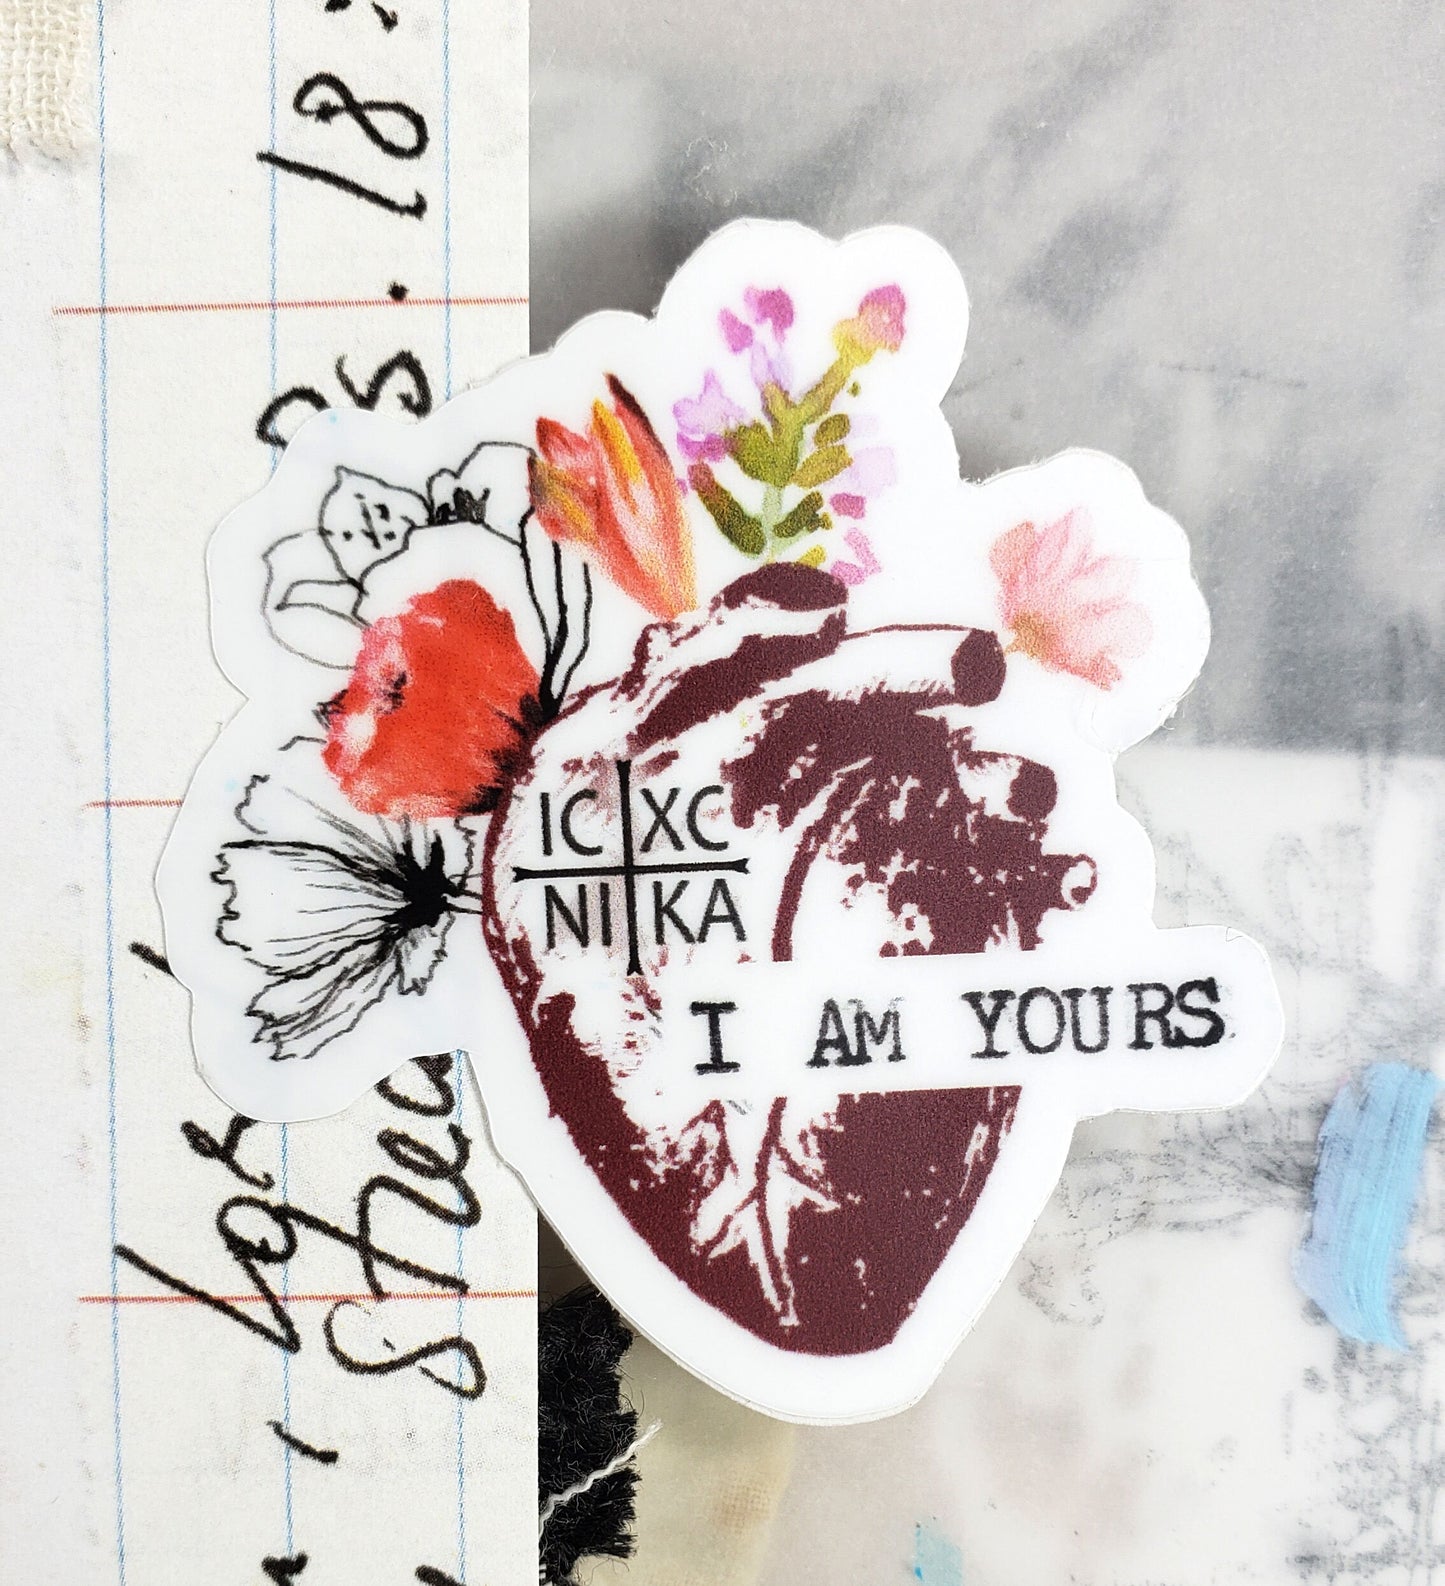 I am Yours - sticker